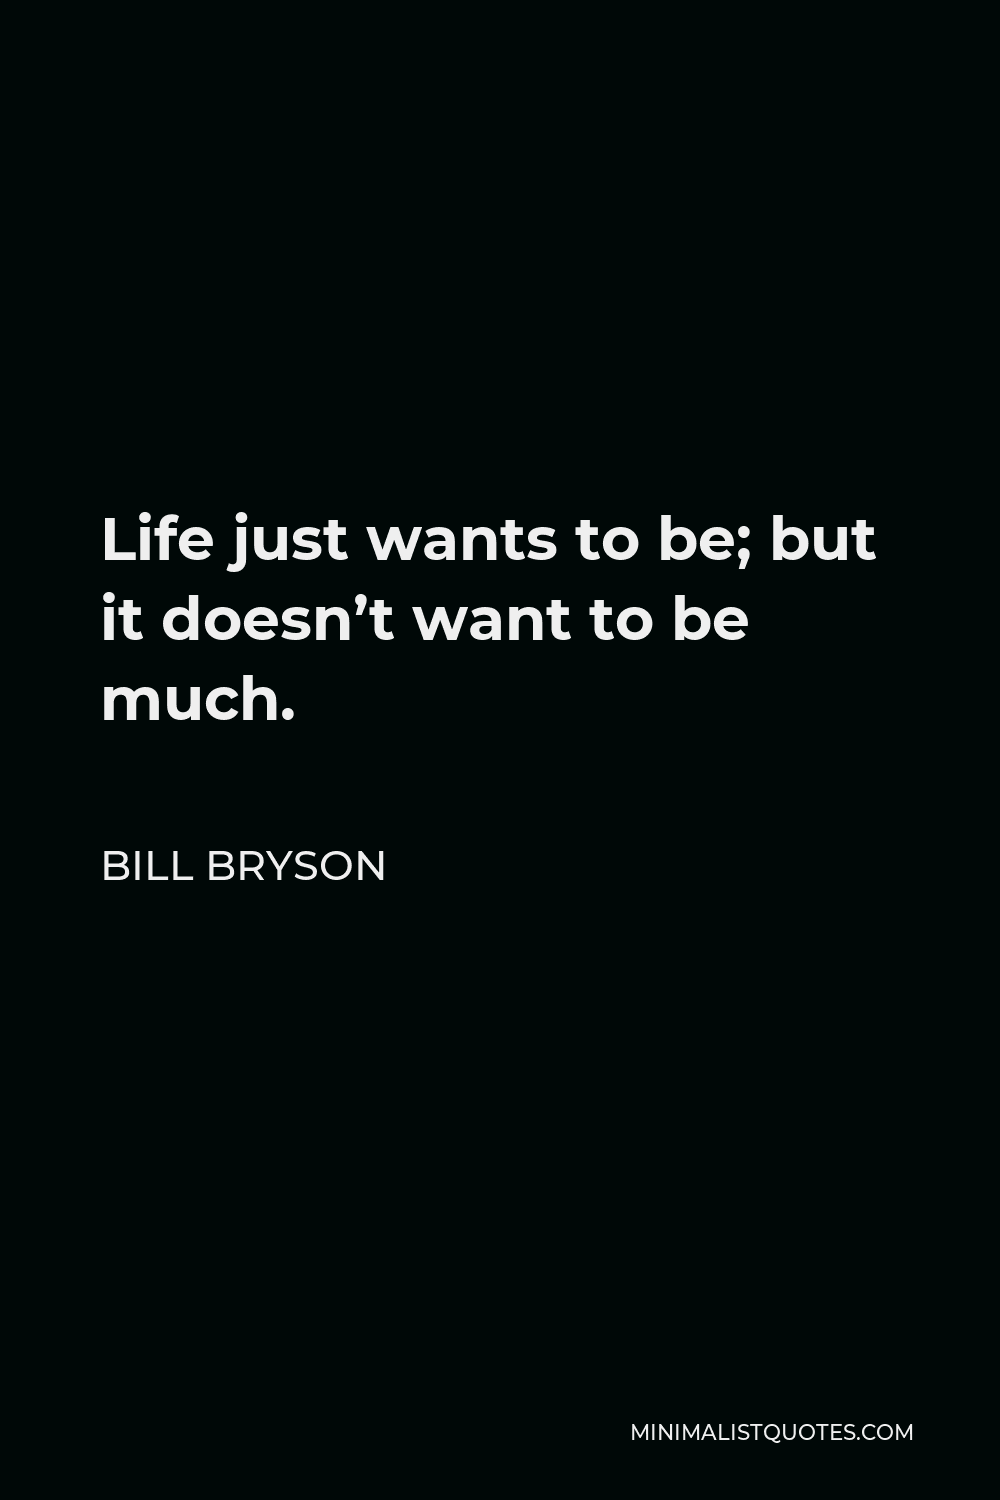 Bill Bryson Quote - Life just wants to be; but it doesn’t want to be much.